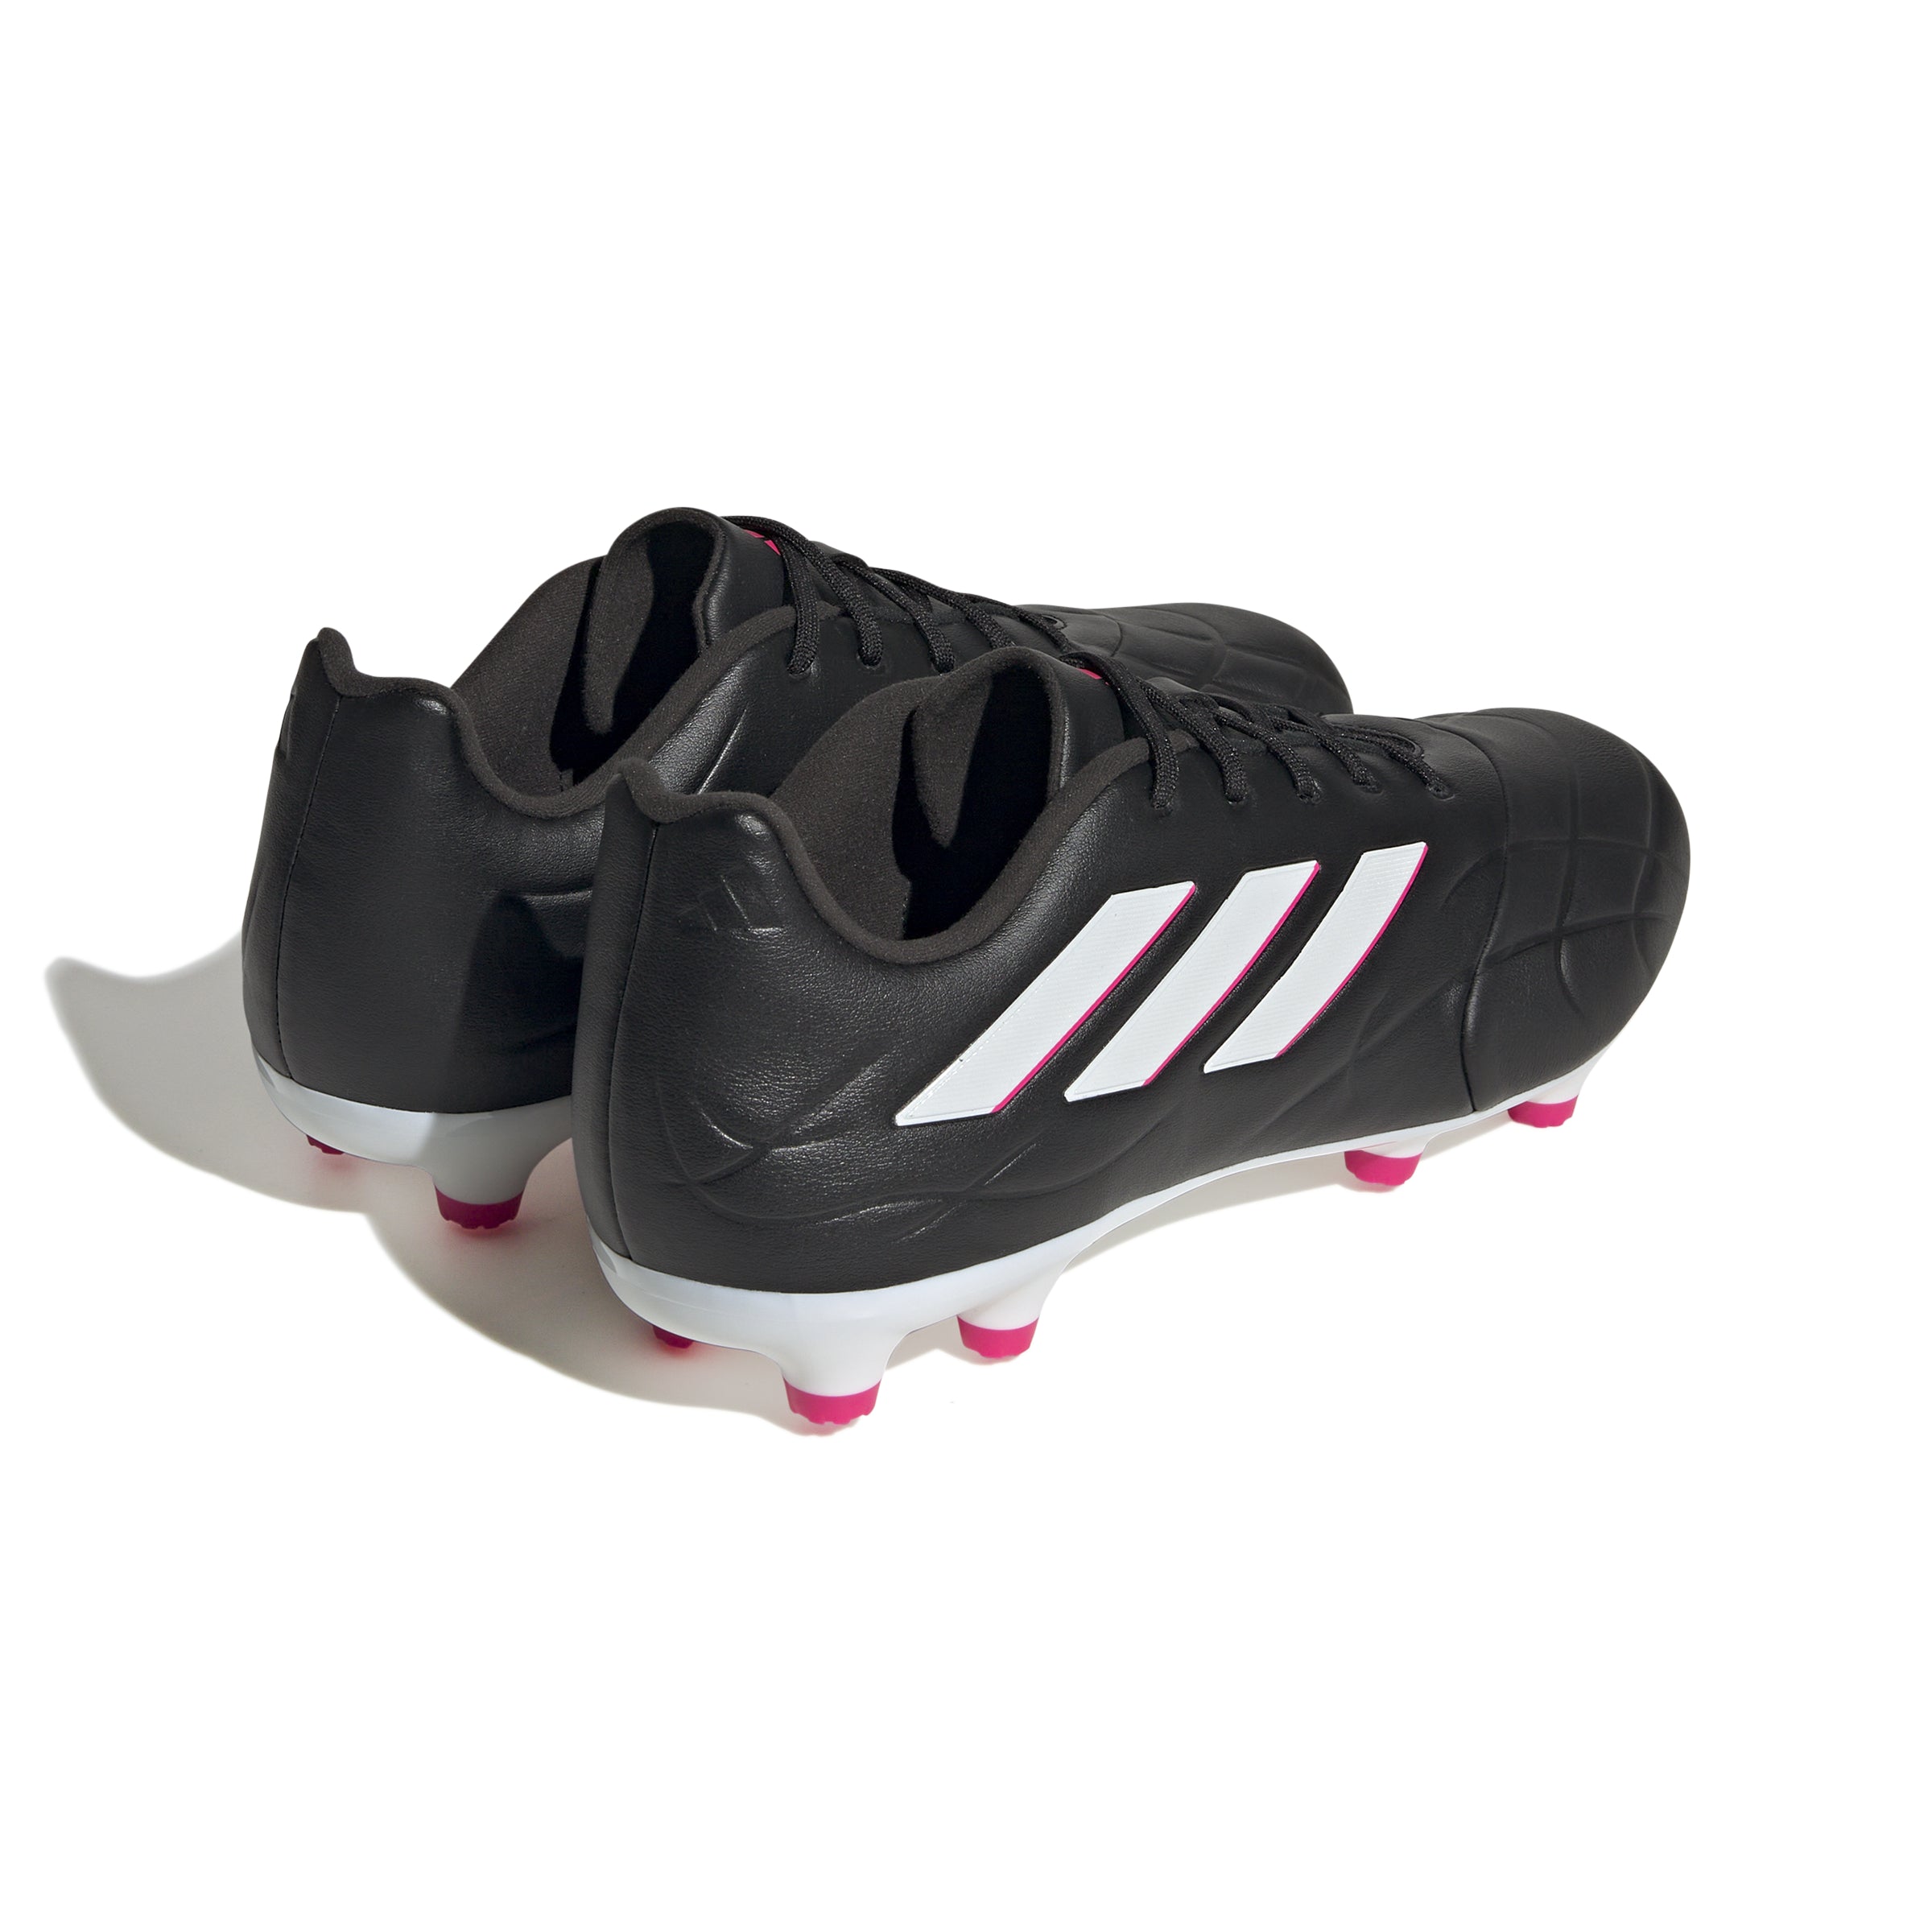 adidas Copa Pure.3 FG Firm Ground Soccer Cleats